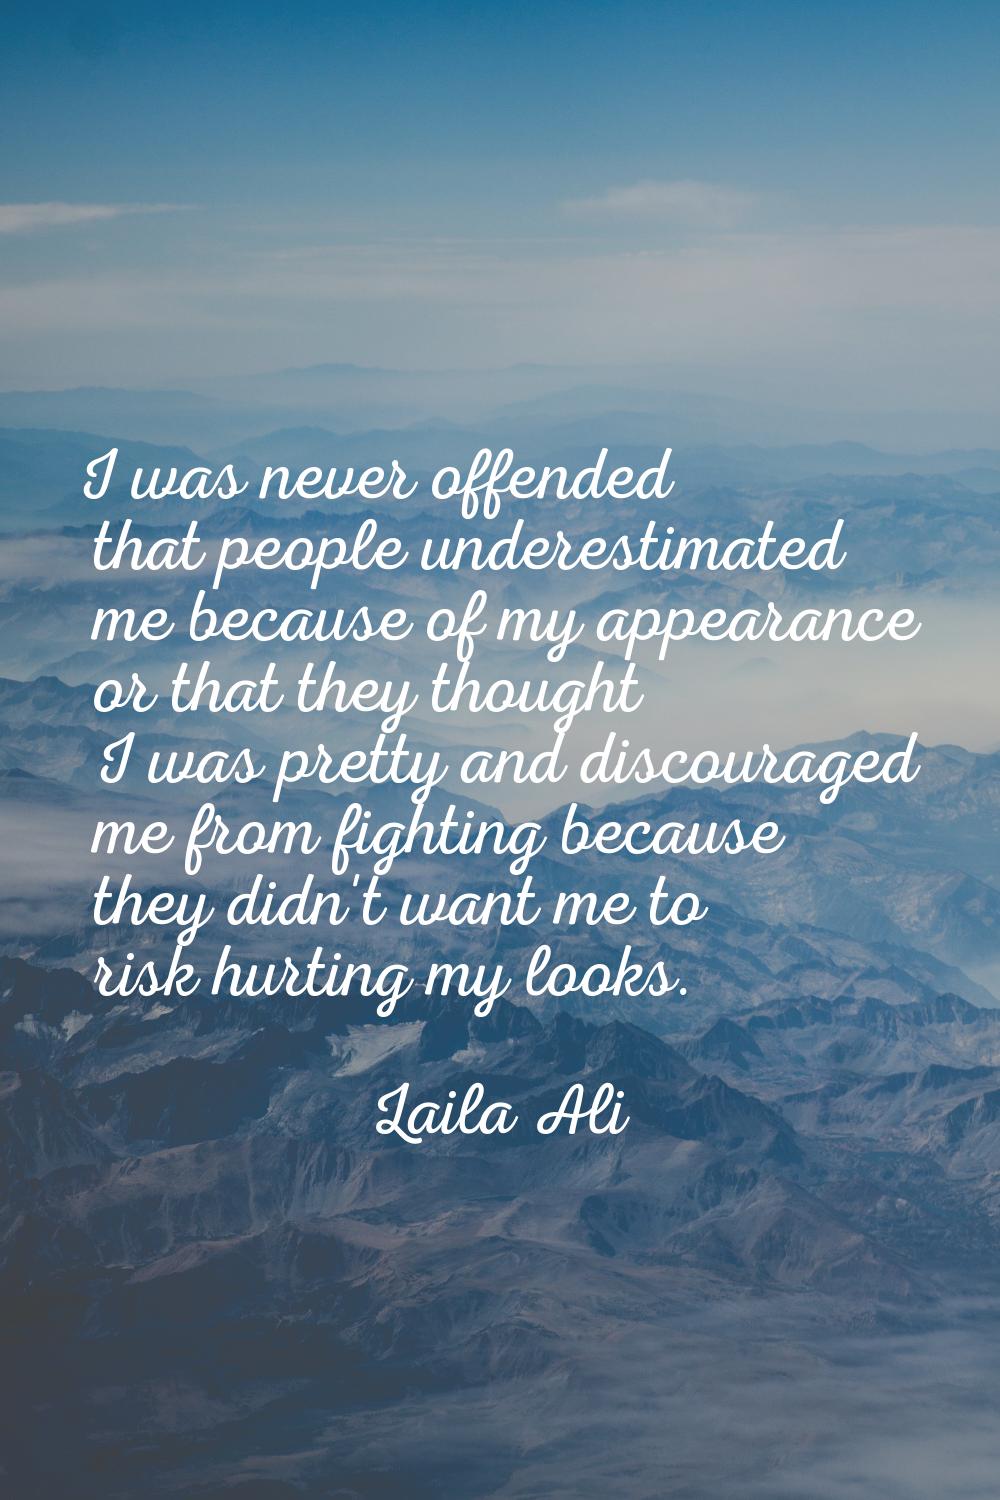 I was never offended that people underestimated me because of my appearance or that they thought I 